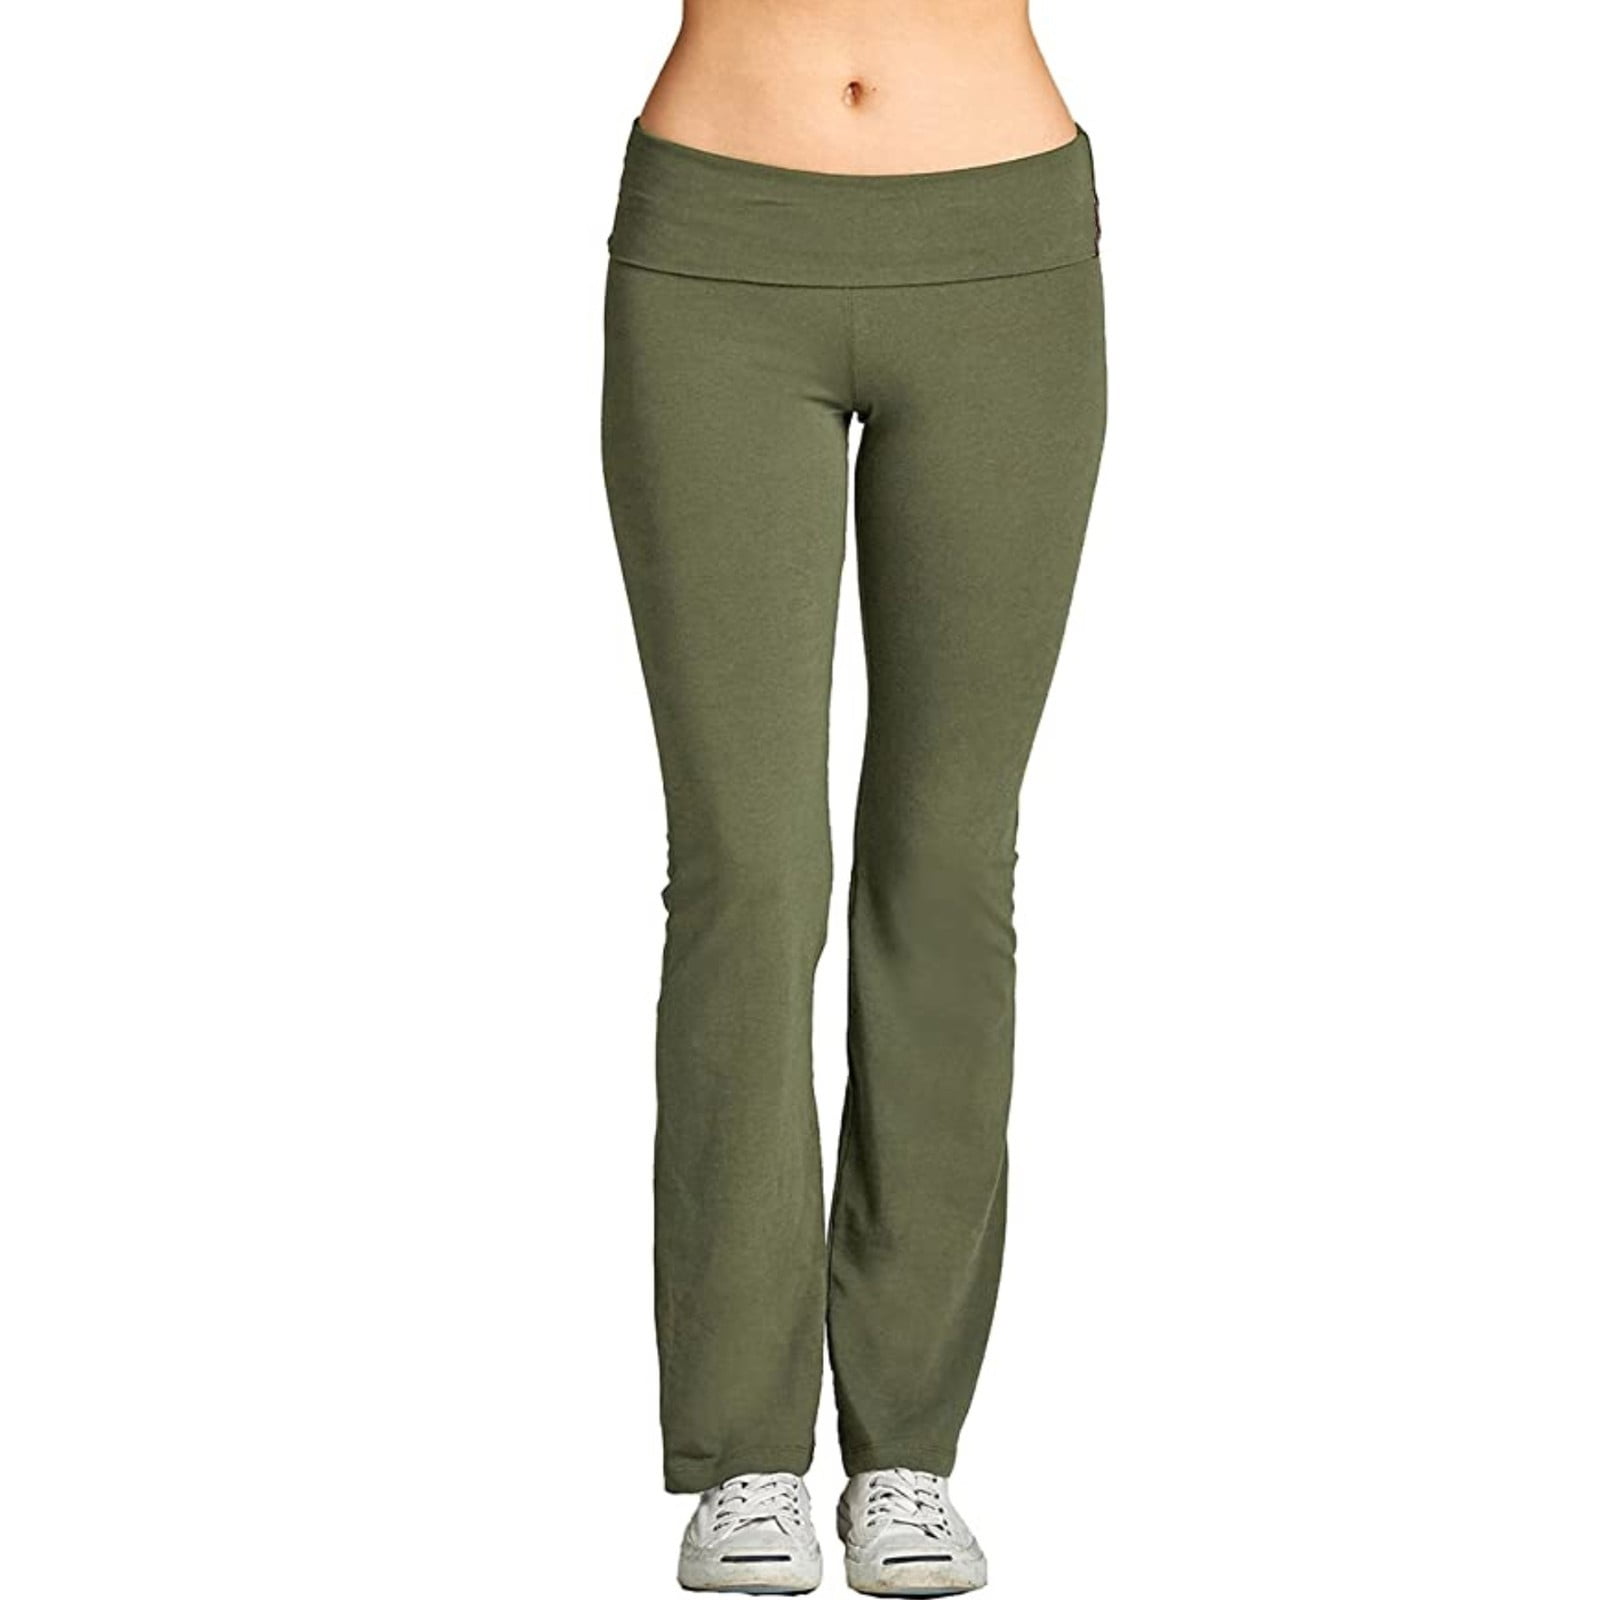 Skinny Bootcut Yoga Pants for Women's Low Rise Flare Pants Workout